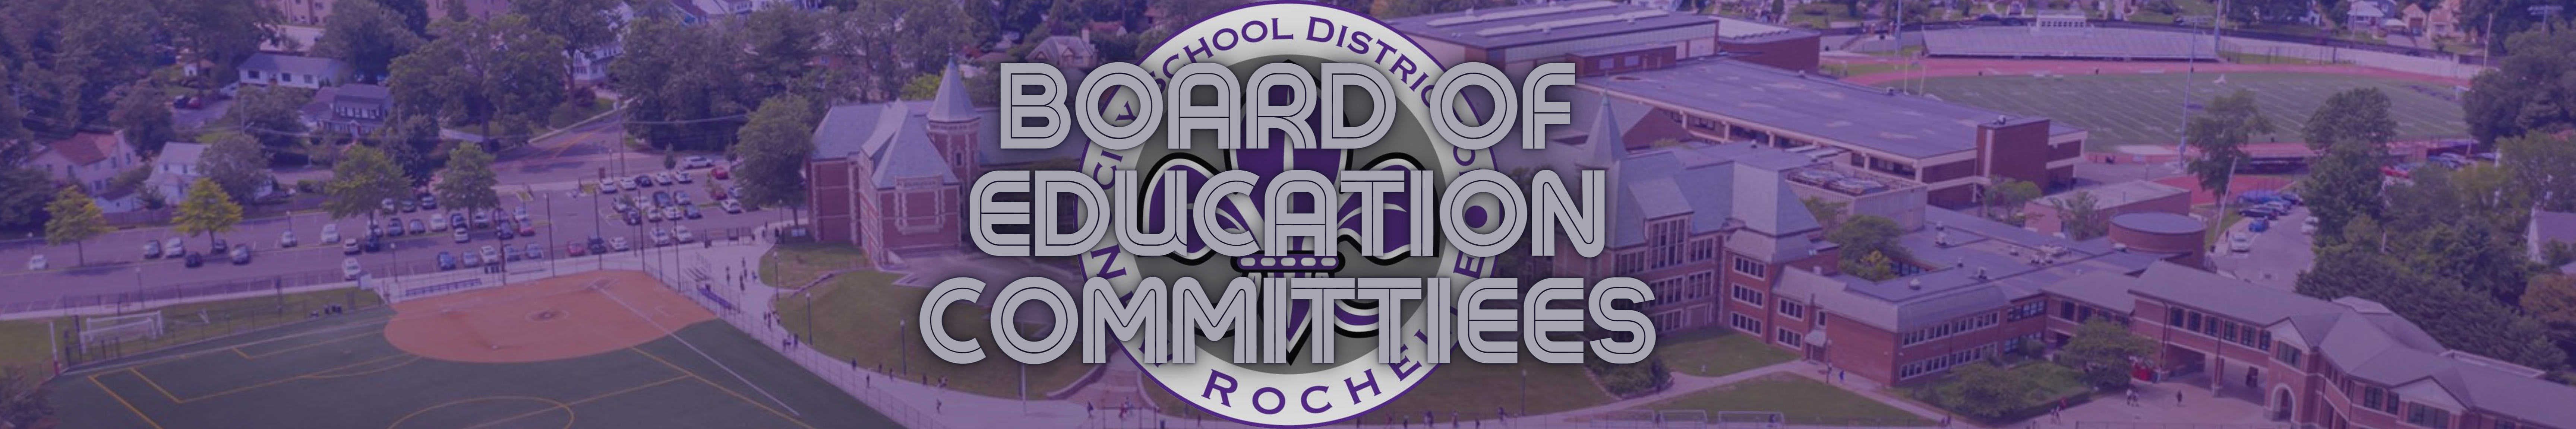 Board of Education Committiees banner